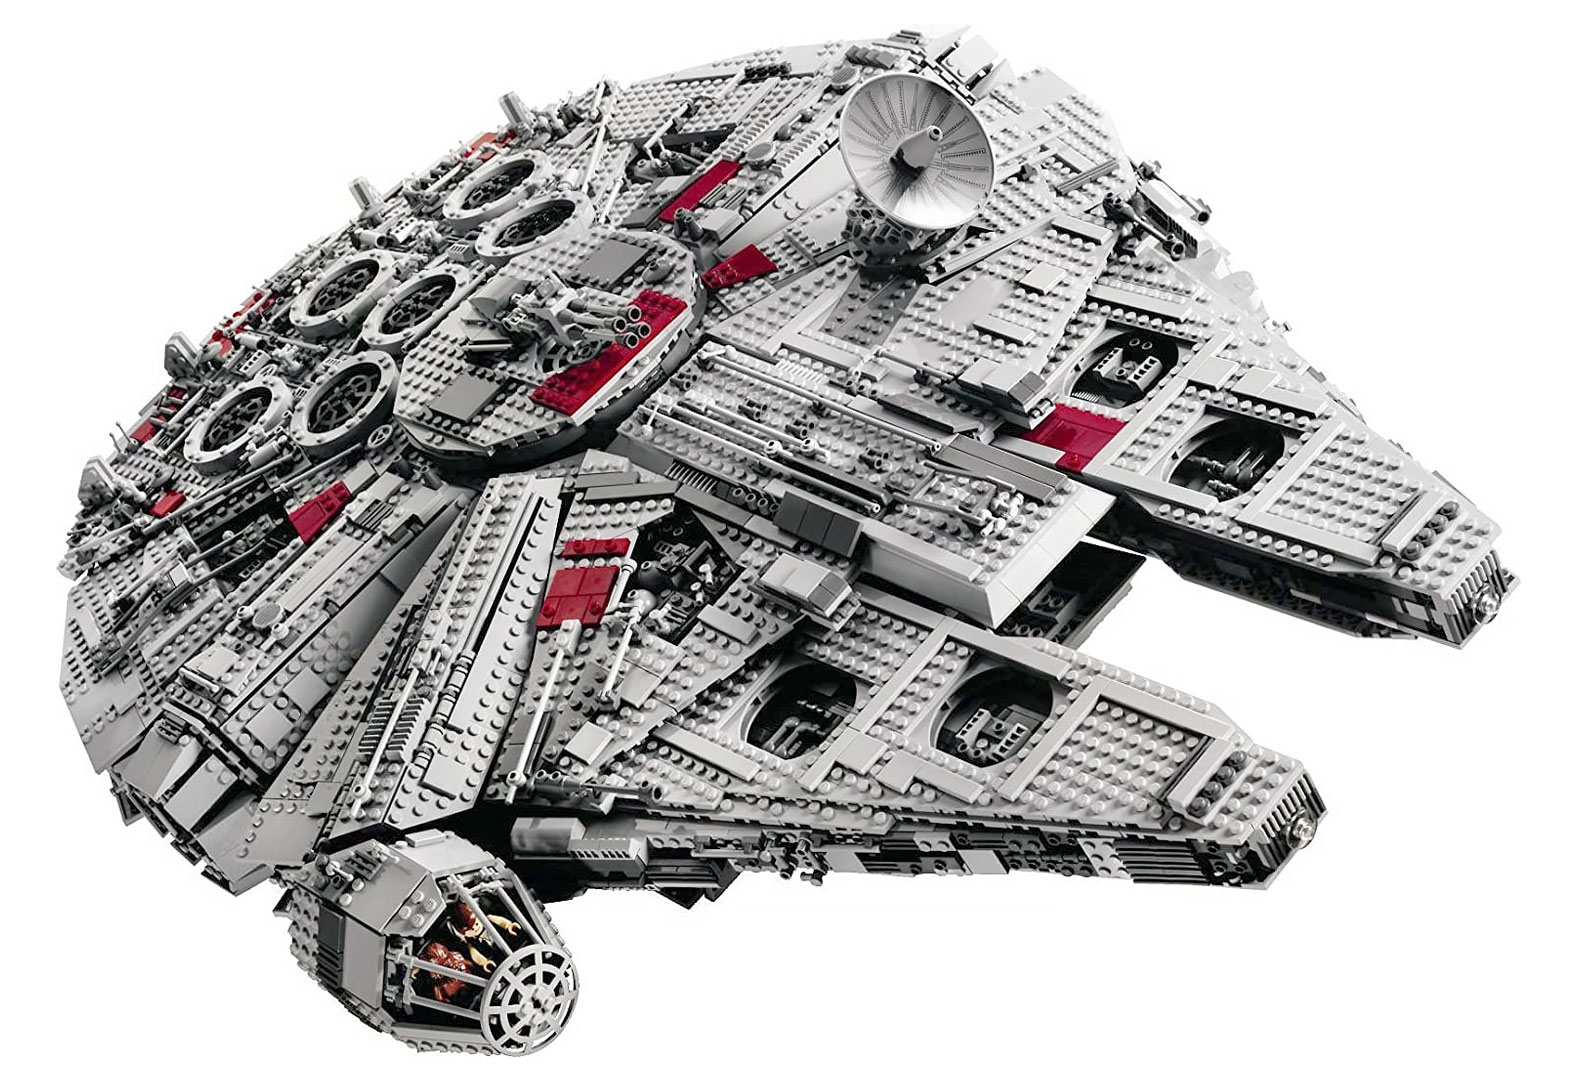 Lego 10179 Millenium Falcon UCS - Lego Star Wars Ultimate Collector Series